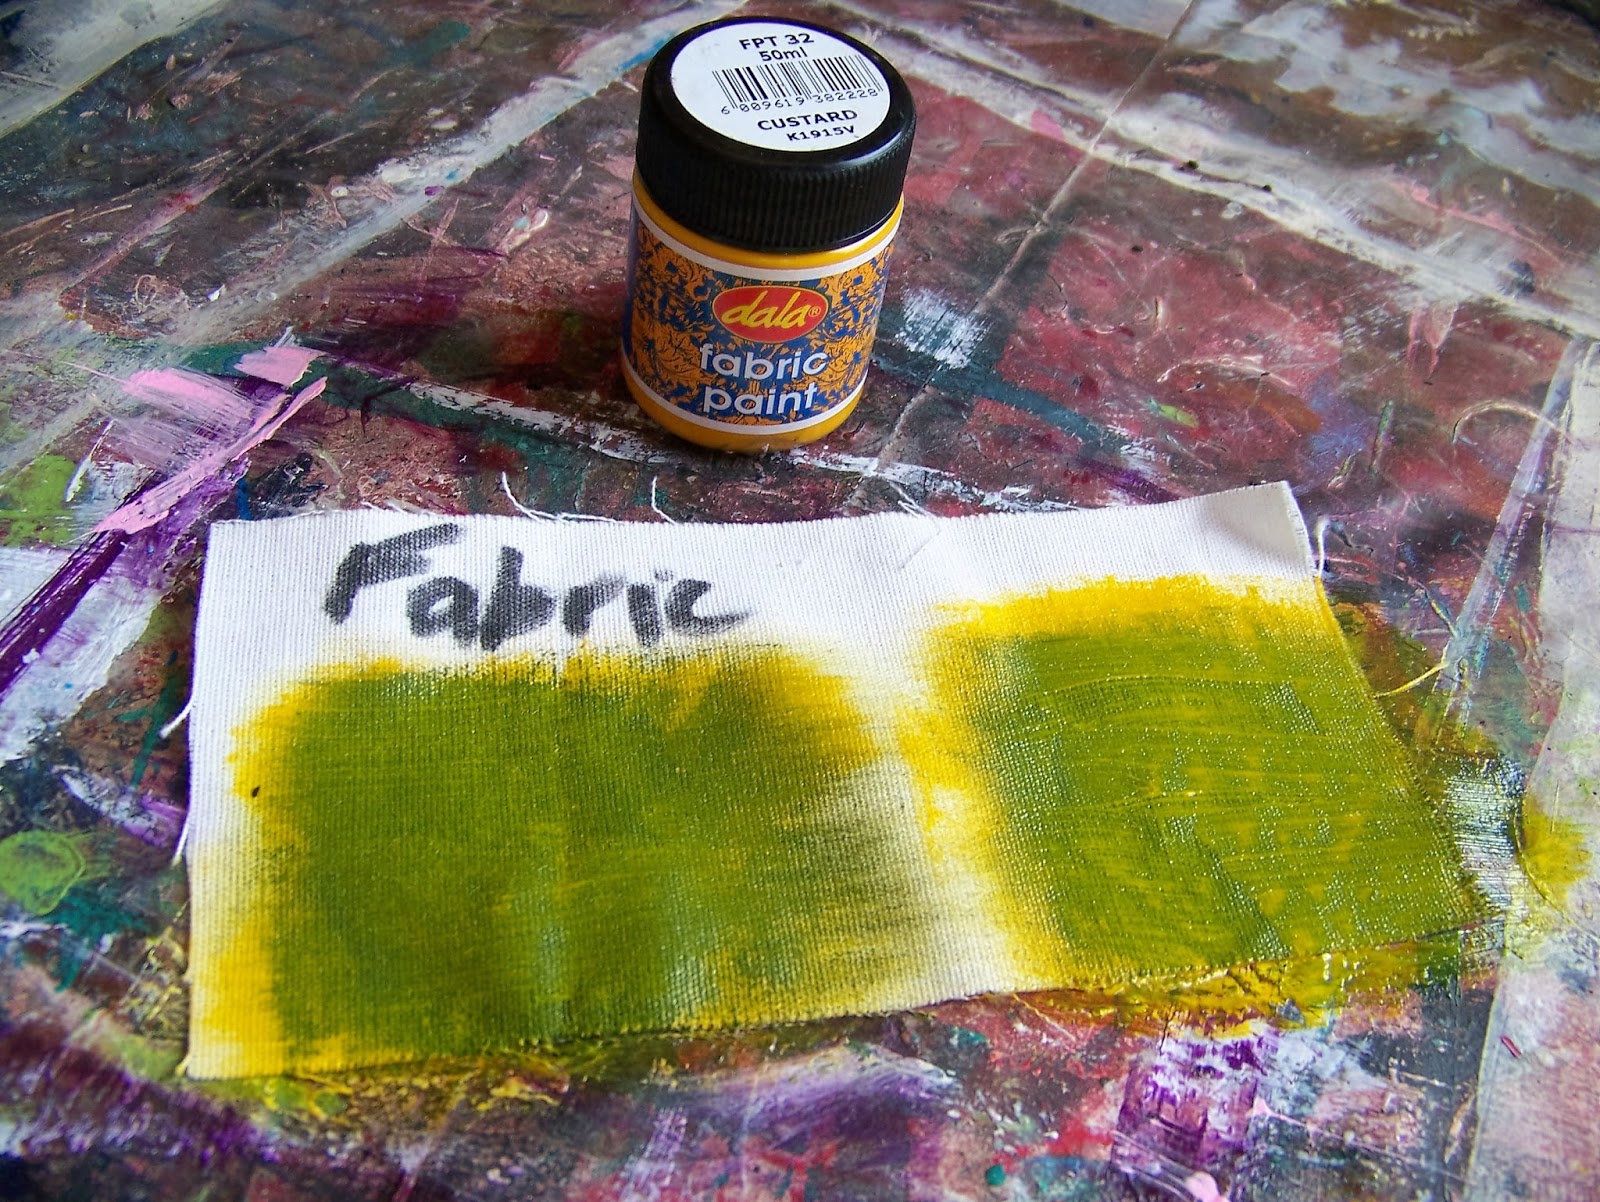 A Pretty Talent Blog: Testing Crackle Medium With Different Paint Mediums